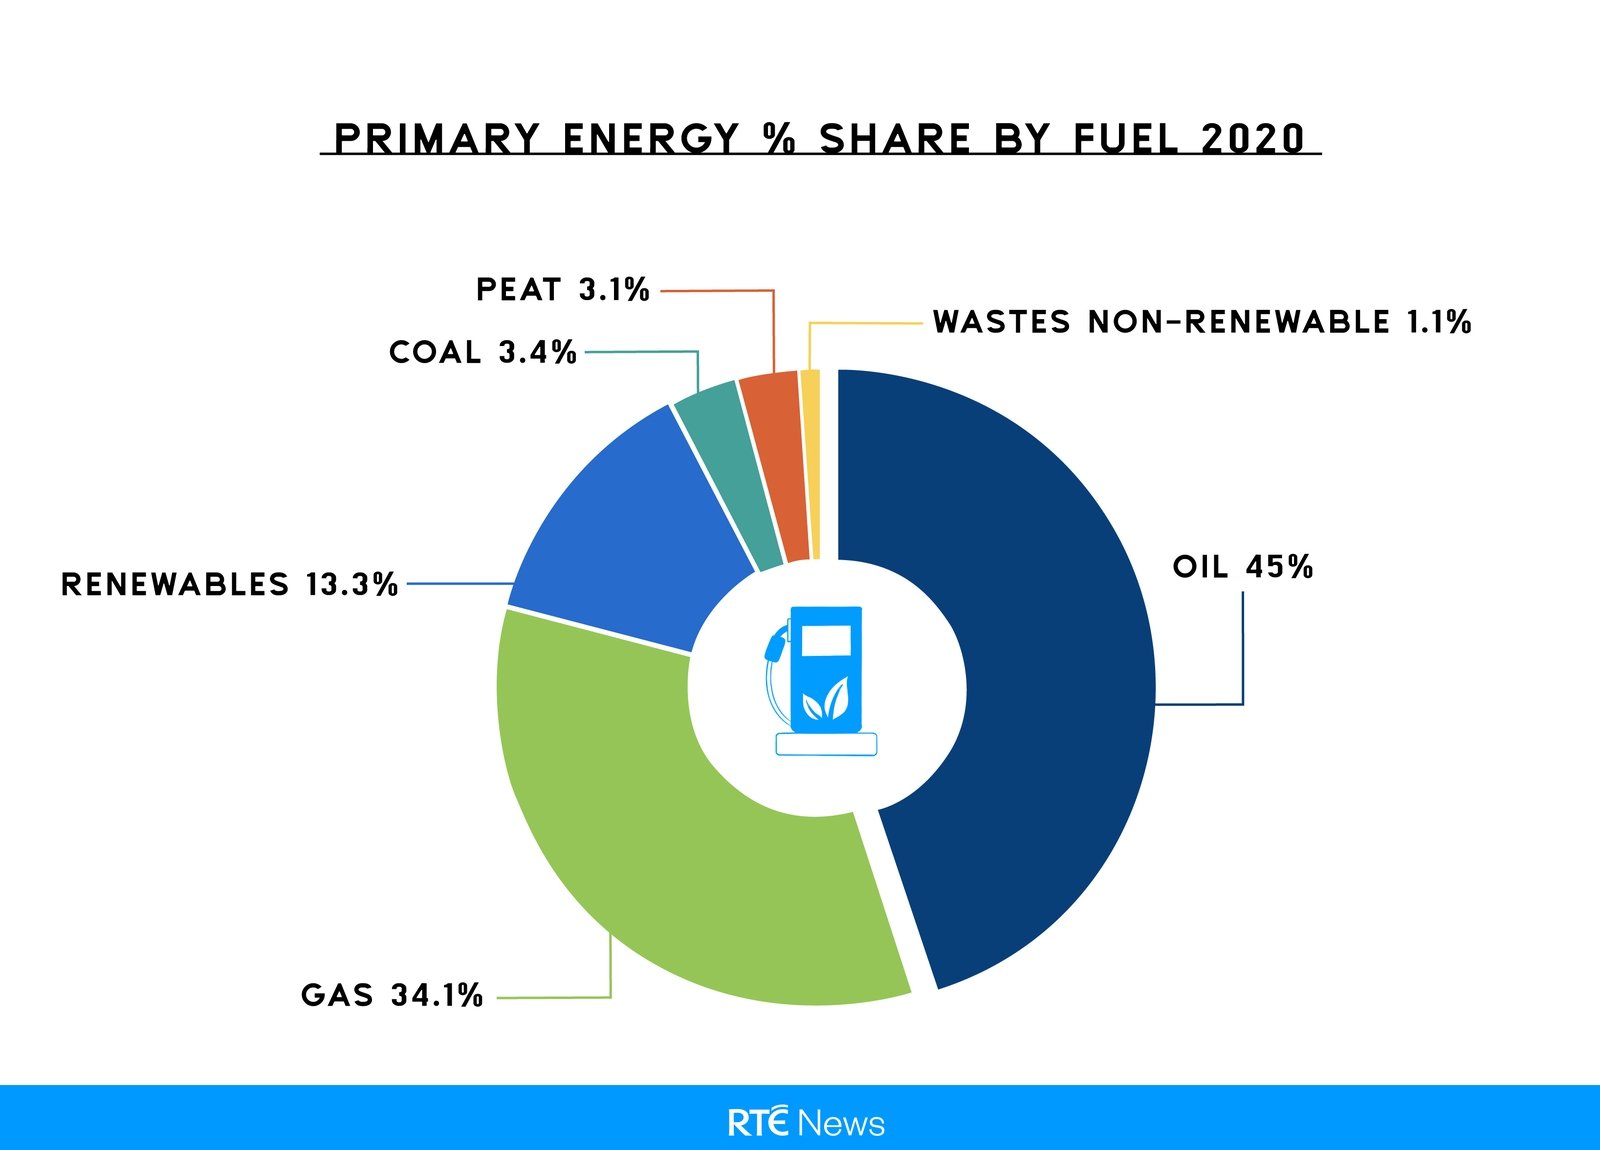 Image - Primary Energy % Share By Fuel 2020